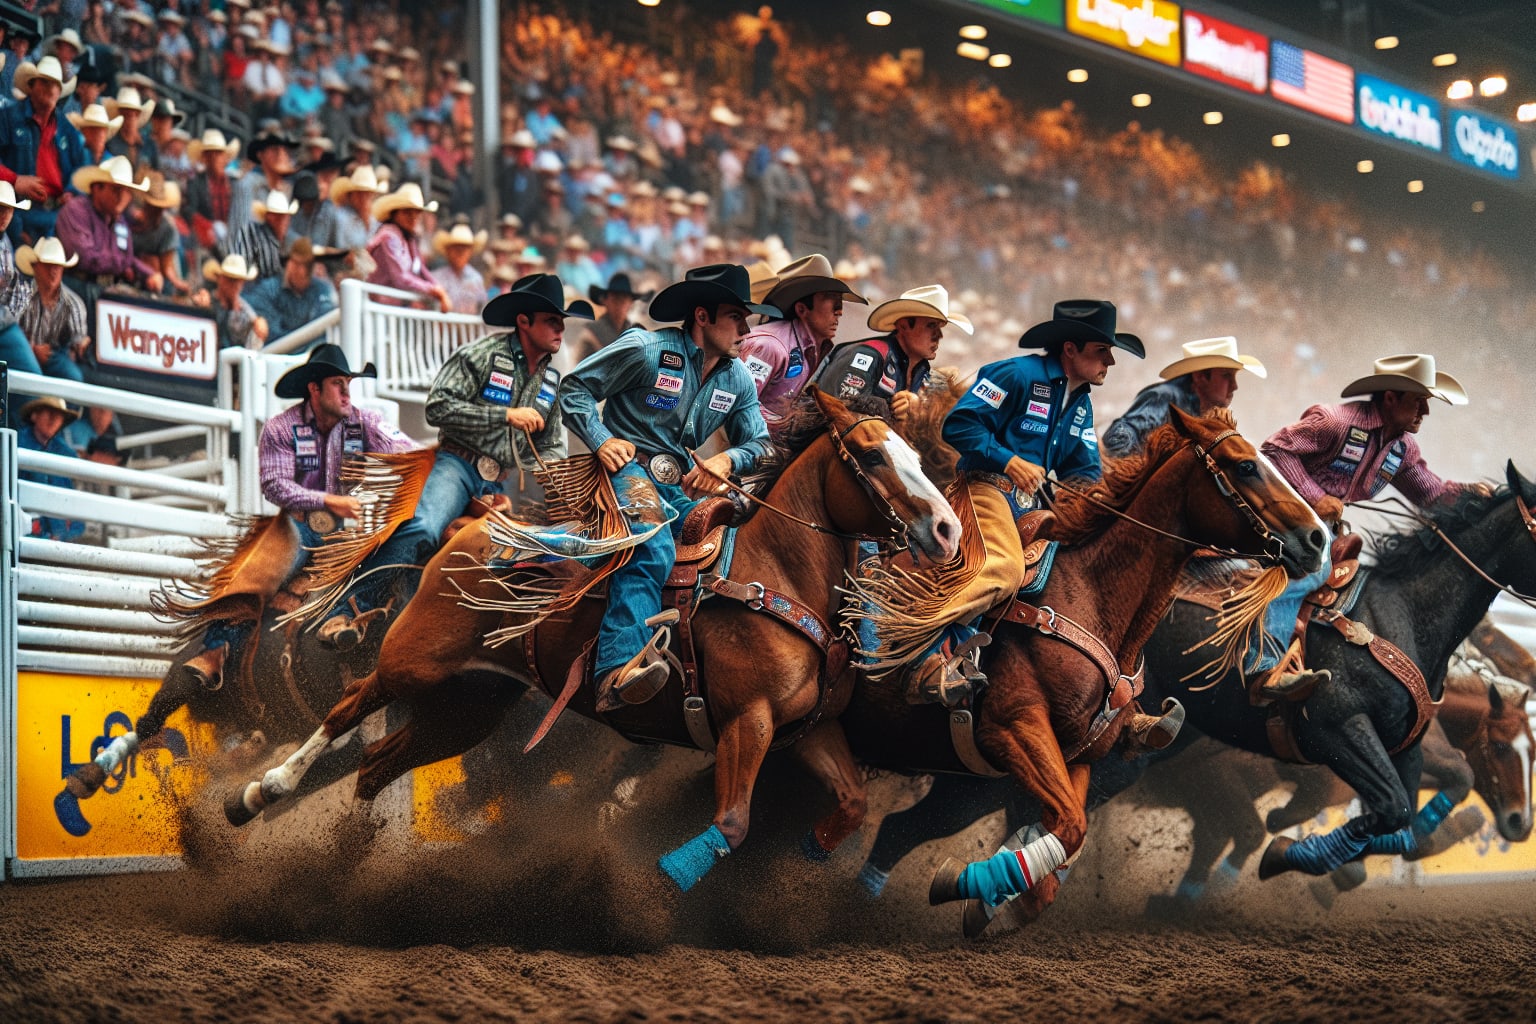 What Are the Strengths and Weaknesses of the Top Competitors at the NFR